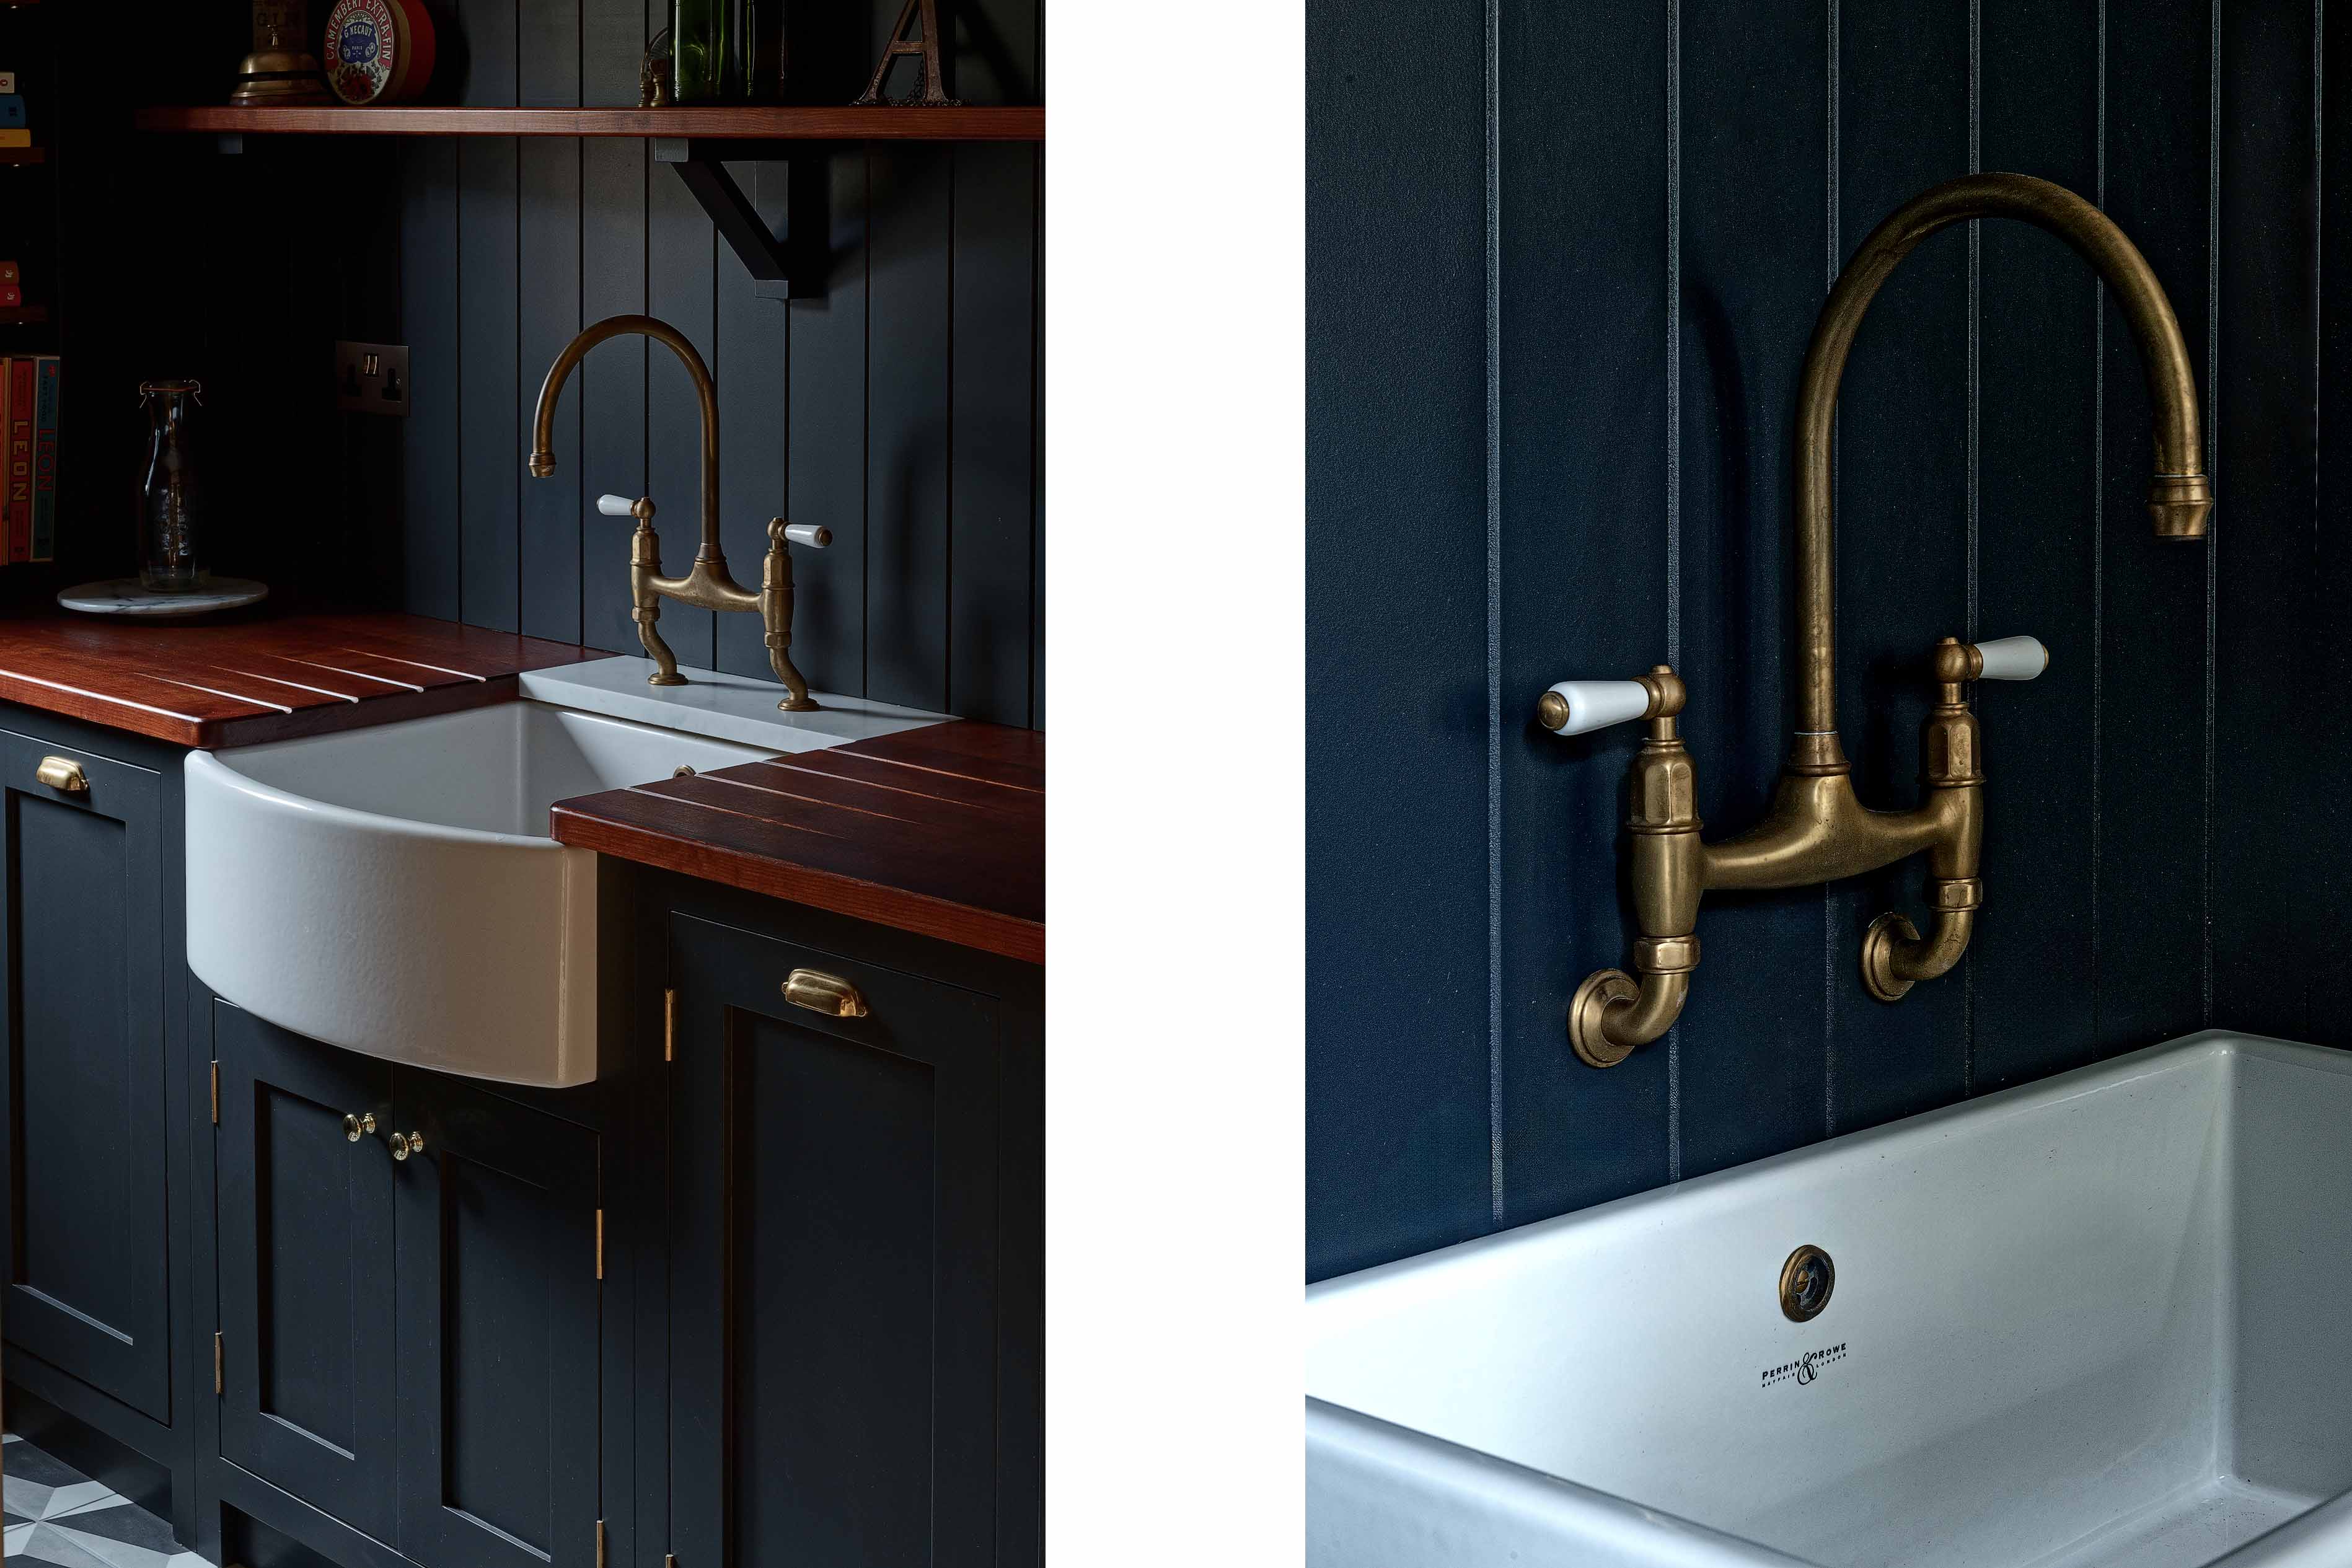 005. Bespoke kitchen shaker style antique aged brass Perrin and Rowe deck wall mount belfast butler sink Farrow and Ball near Cobham, Surrey